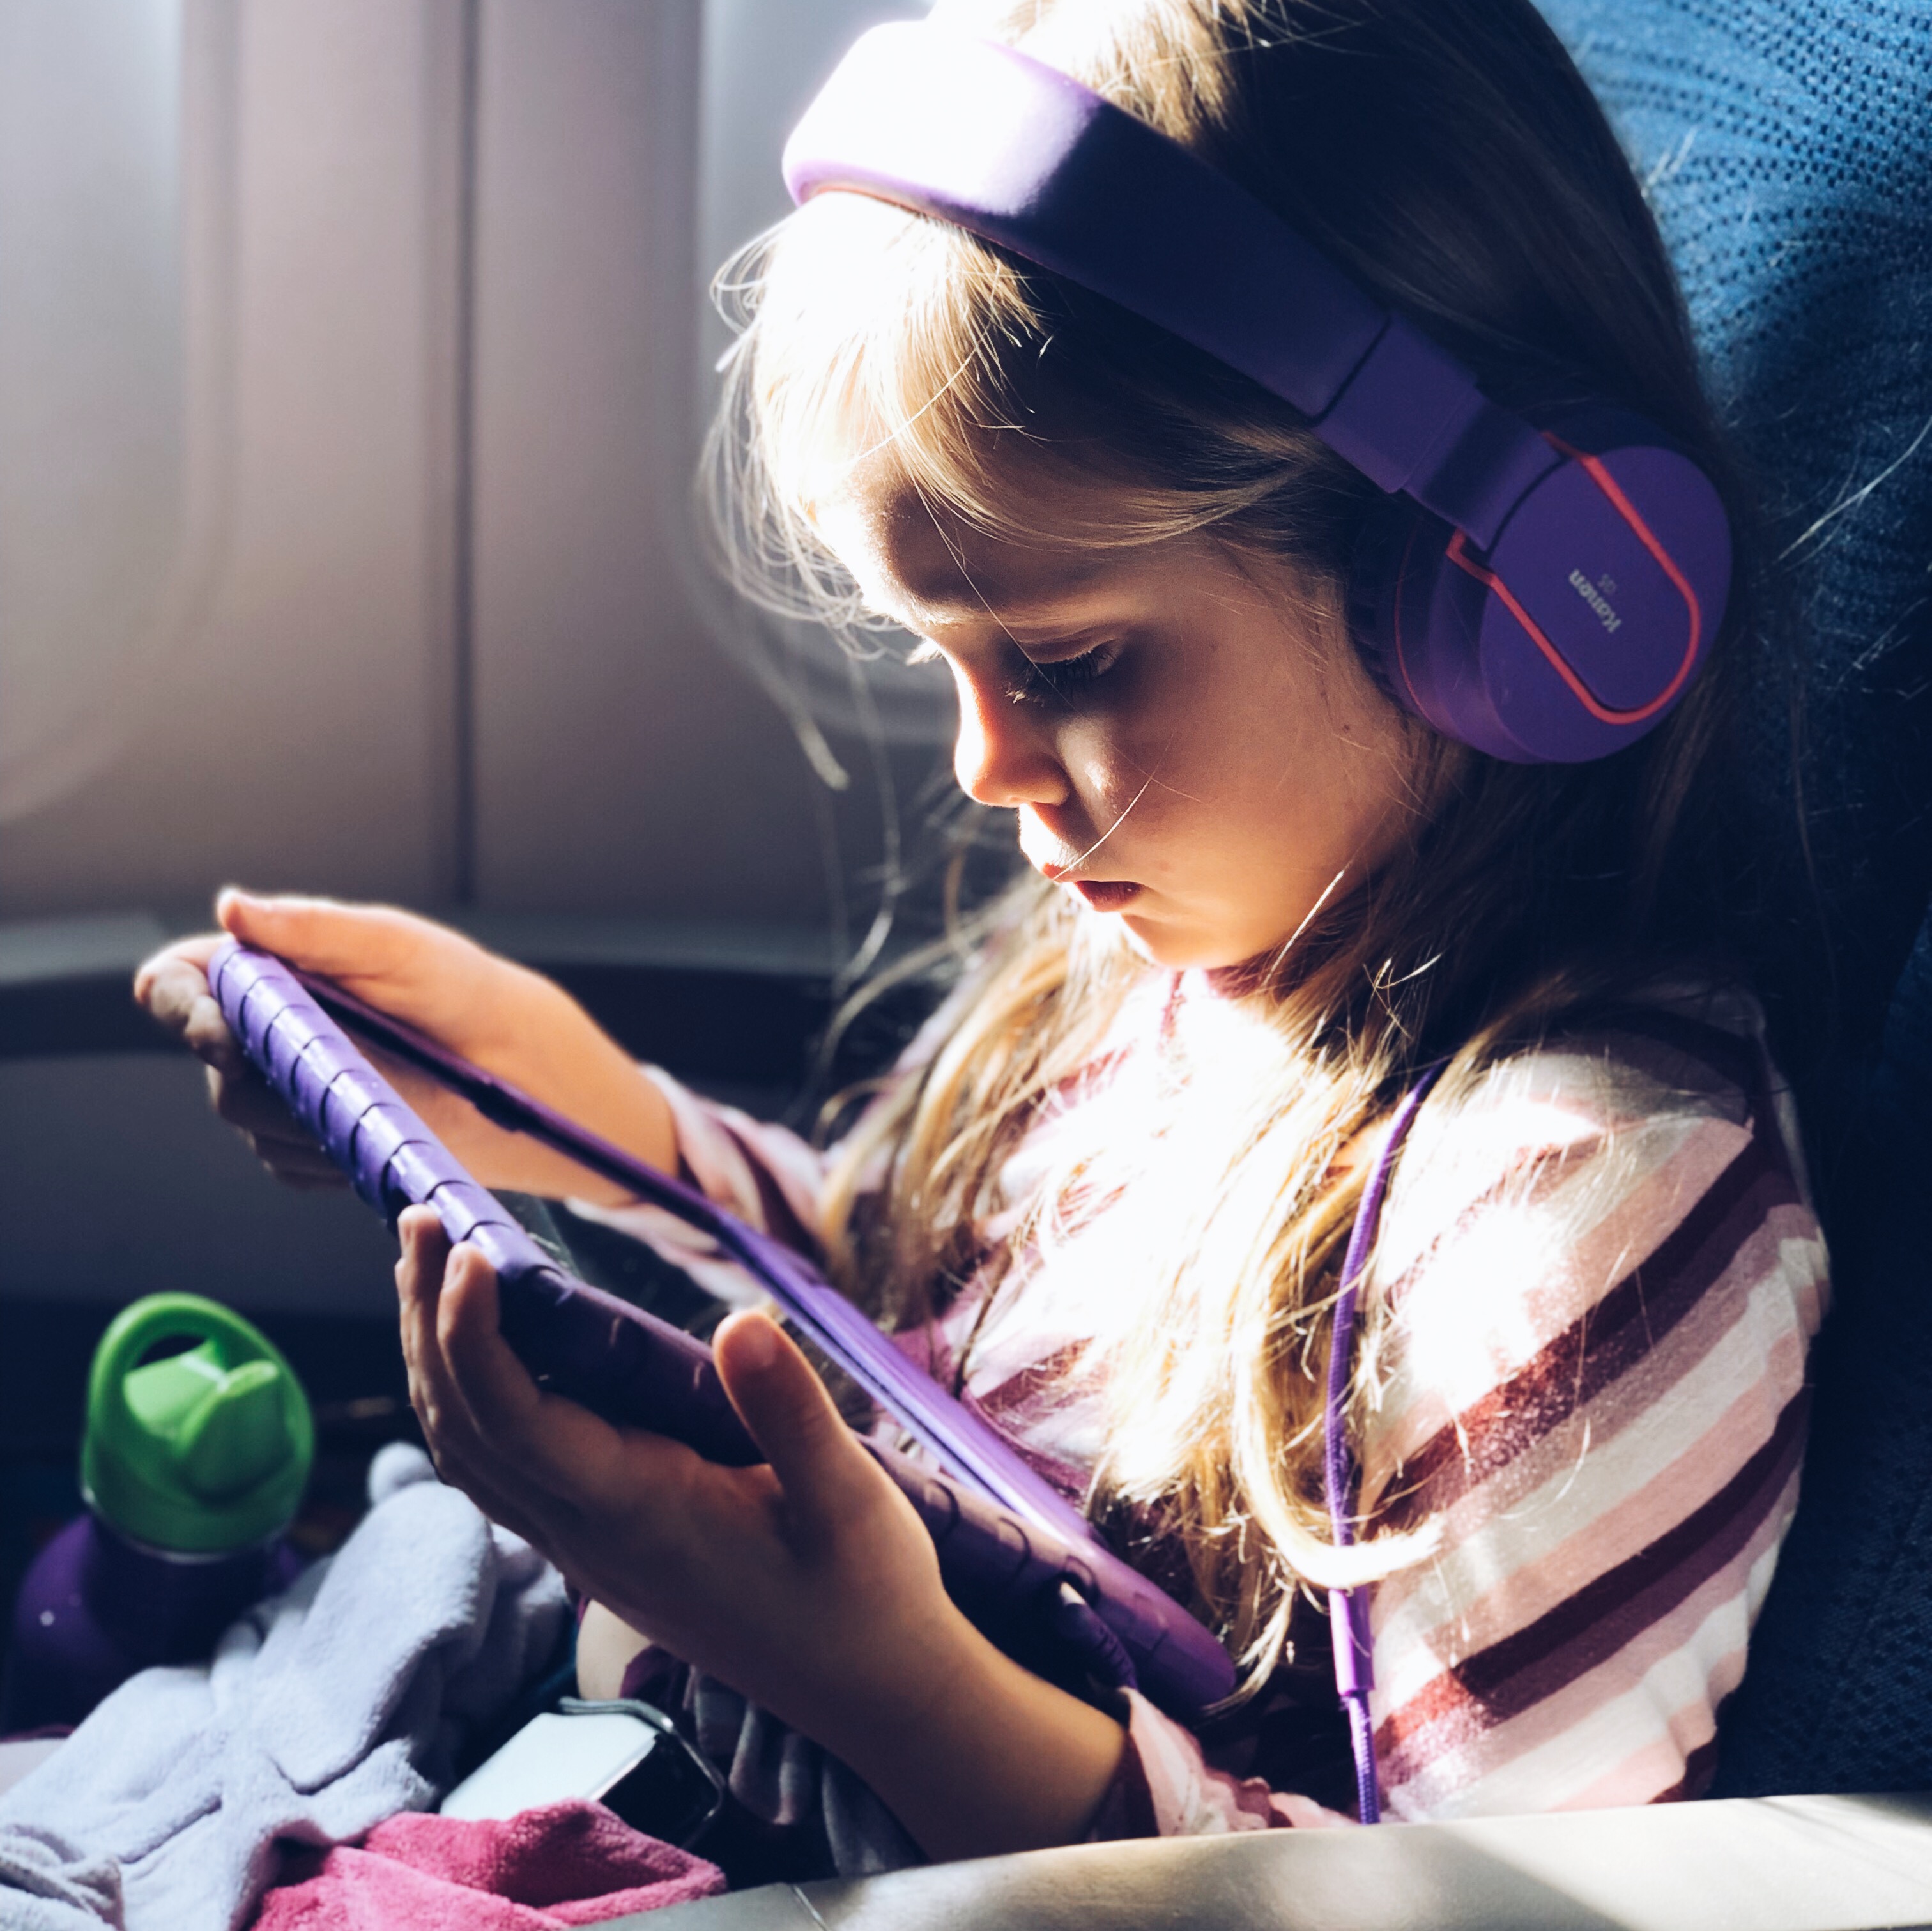 traveling with kids - using an iPad on the plane